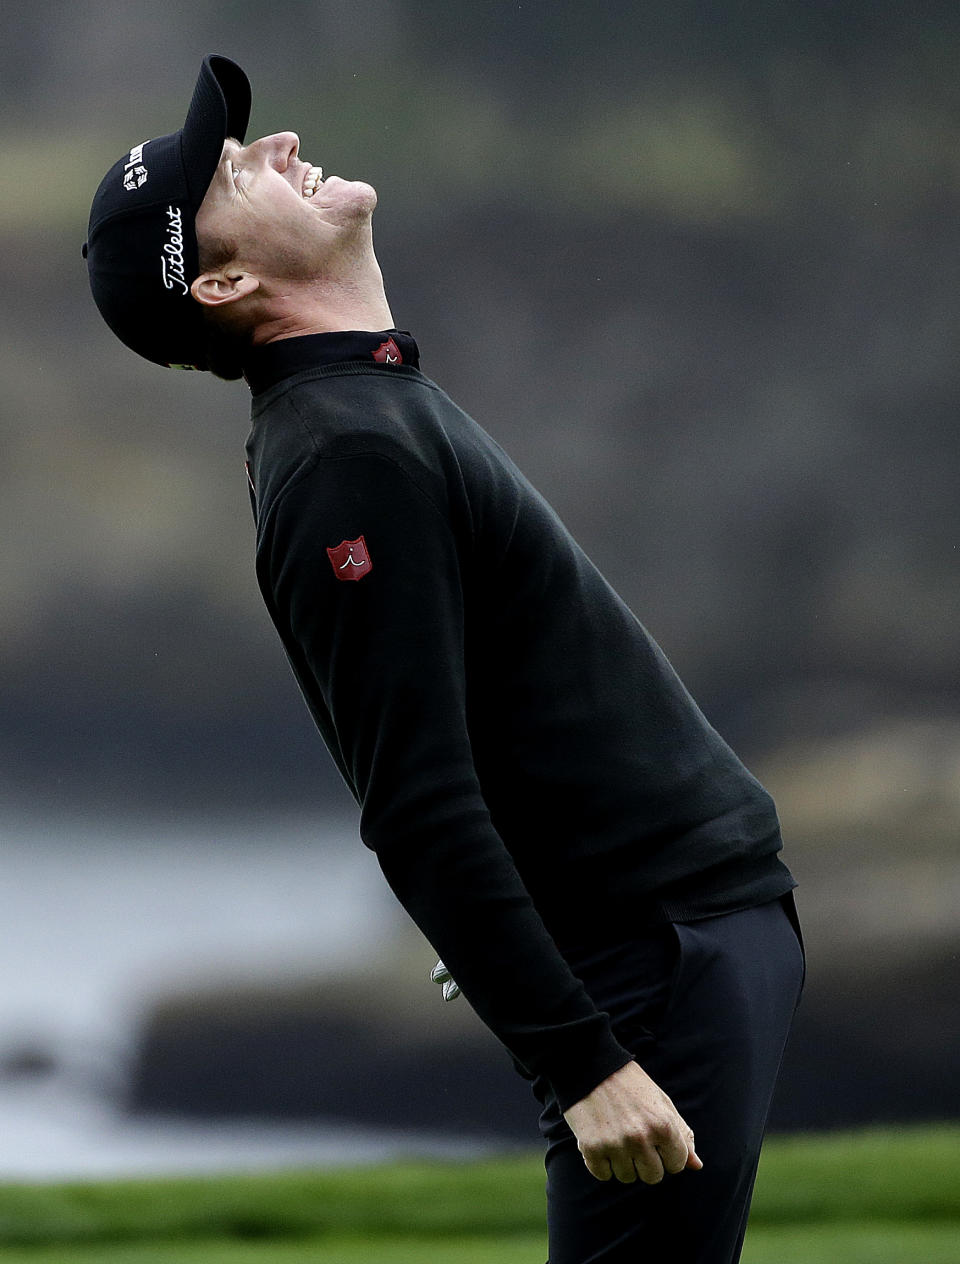 Jimmy Walker celebrates on the 18th green on Sunday, Feb. 9, 2014, after winning the AT&T Pebble Beach Pro-Am golf tournament in Pebble Beach, Calif. (AP Photo/Ben Margot)